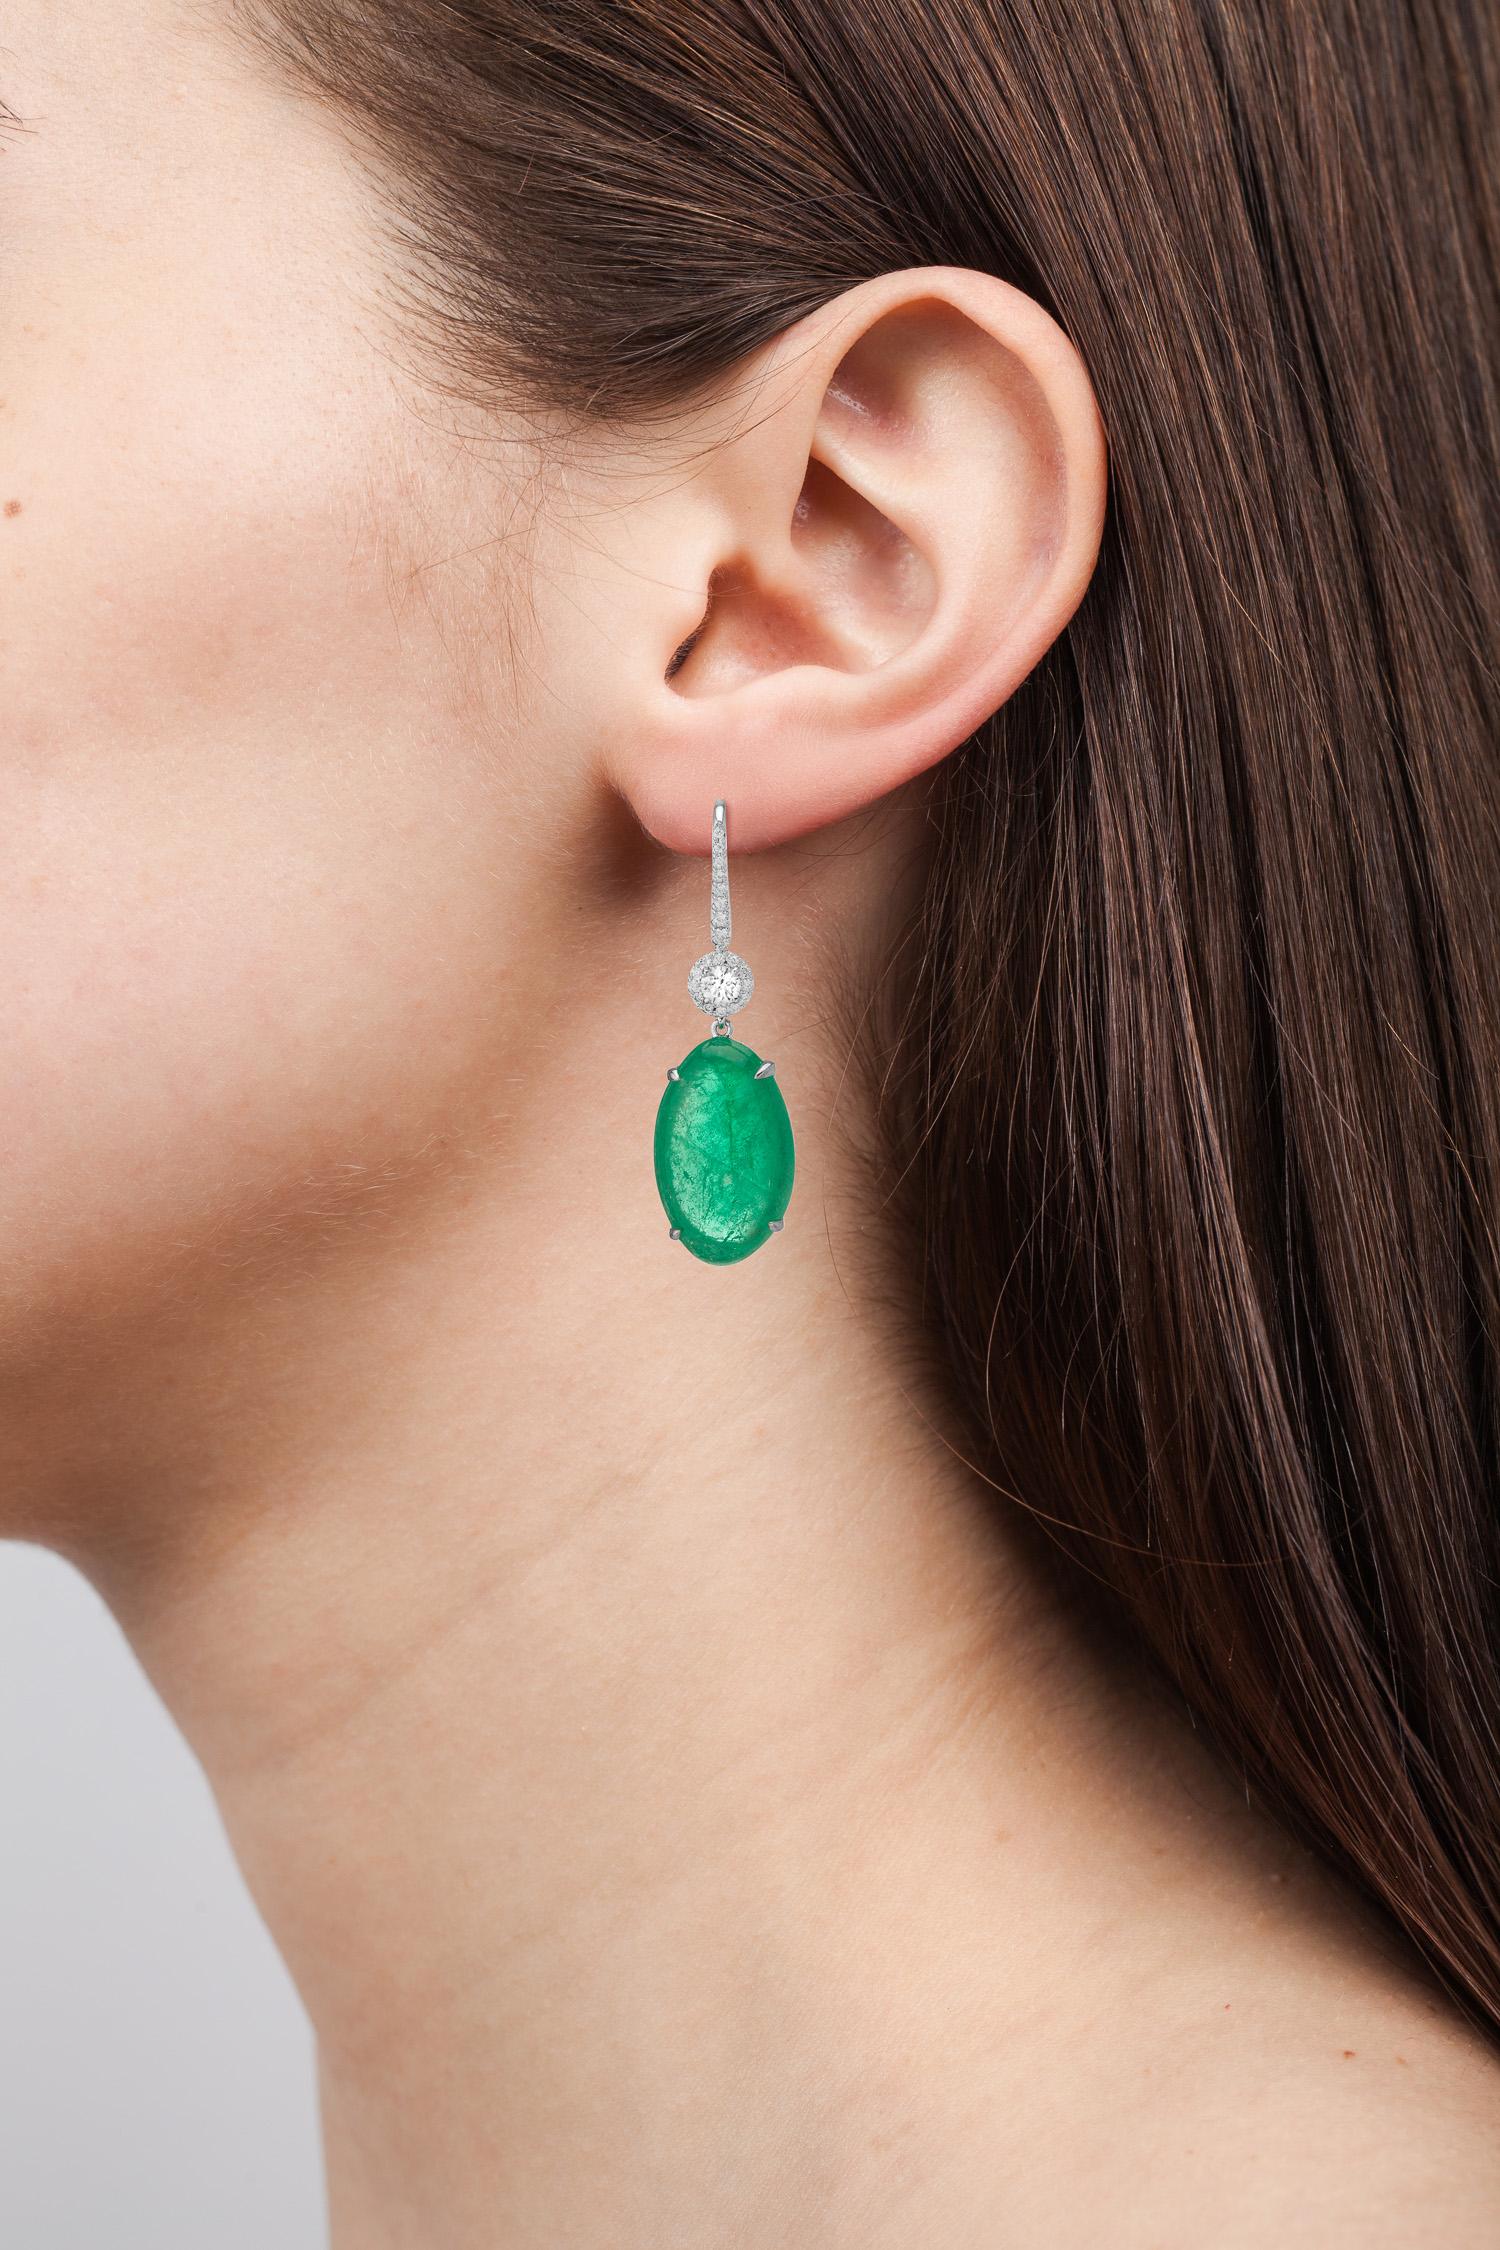 Classic 18 Karat white gold earrings set with 0.51 carats of round brilliant diamonds and Muzo Colombian emeralds weighing 18.85 carats.

Muzo Emerald Colombia Heritage Atocha Earrings set with 18.85 carats Emerald.

Atocha is inspired by a